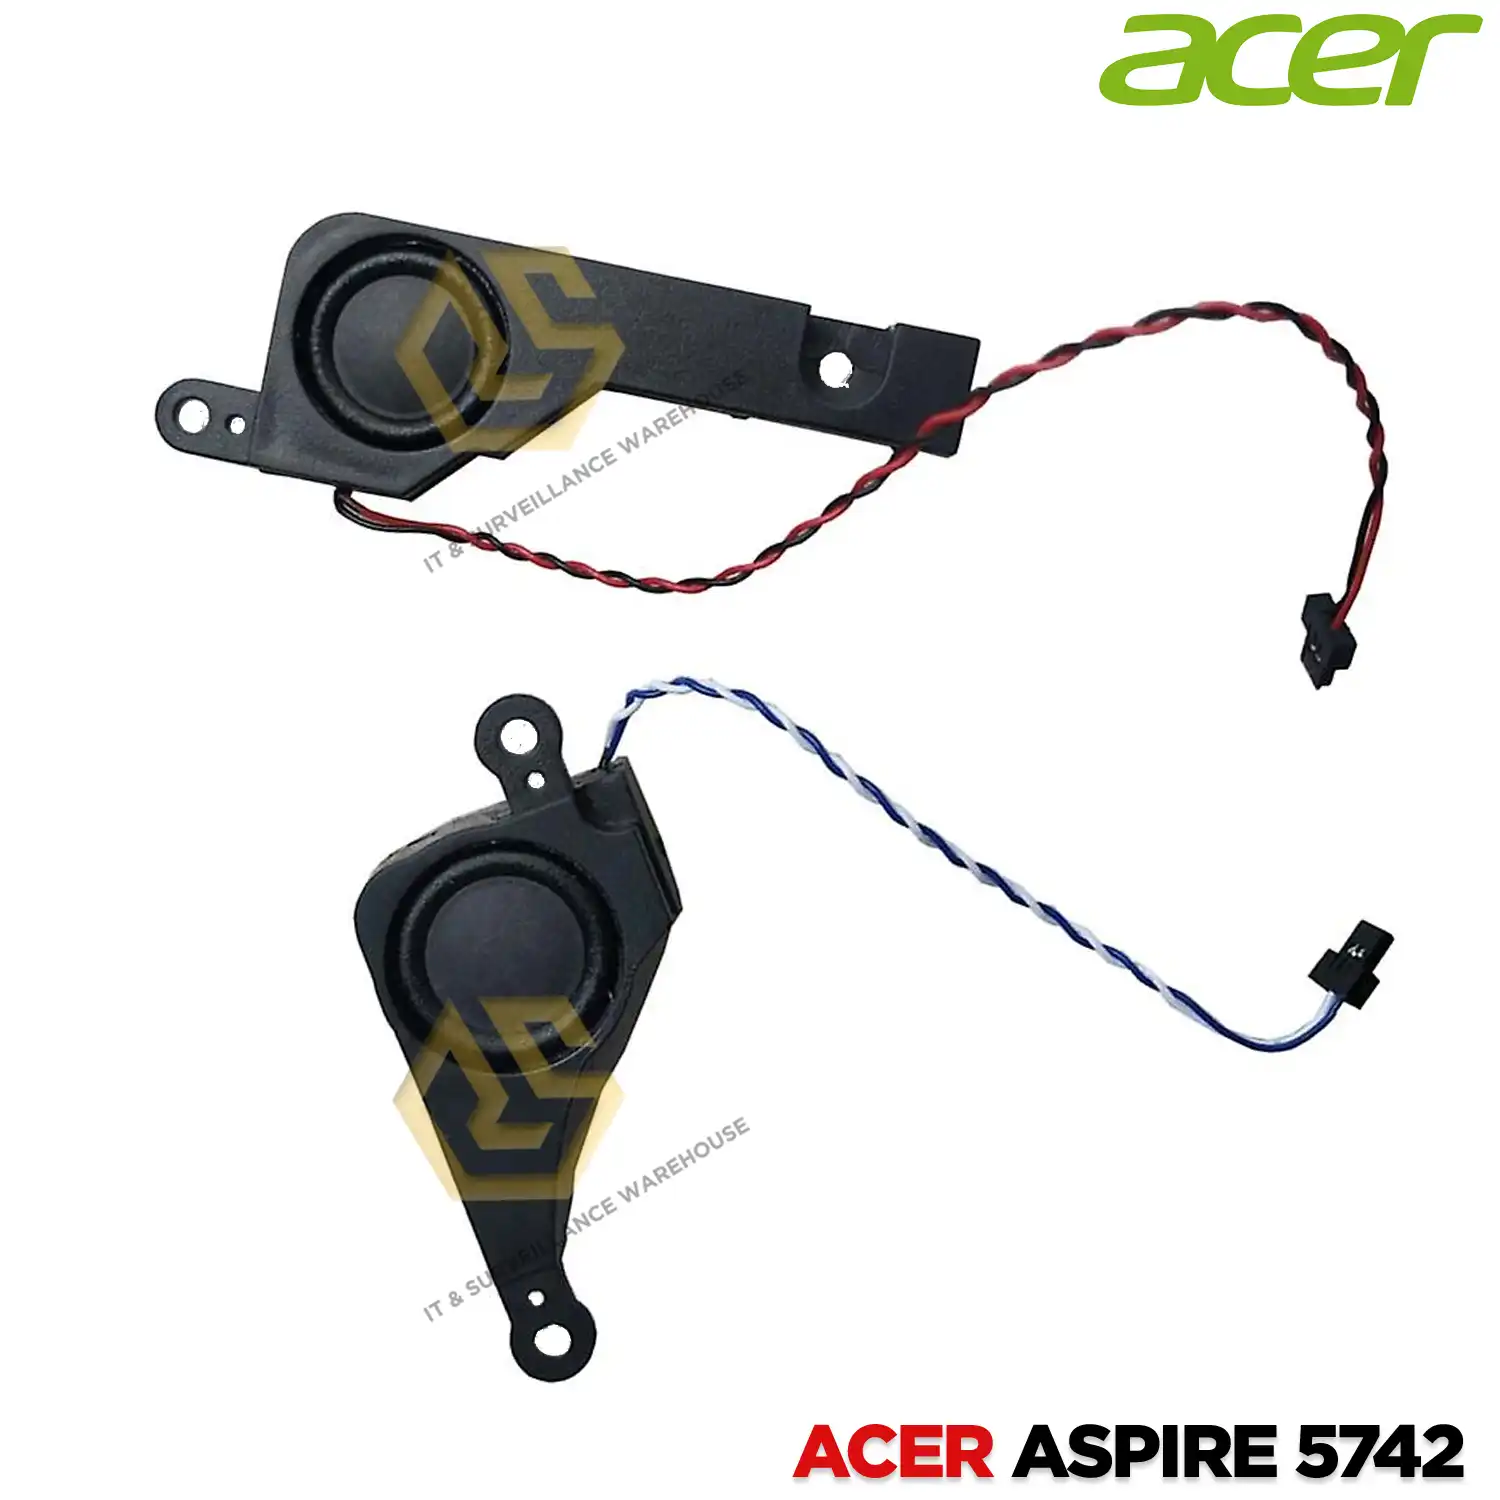 LAPTOP SPEAKERS FOR ACER 5742